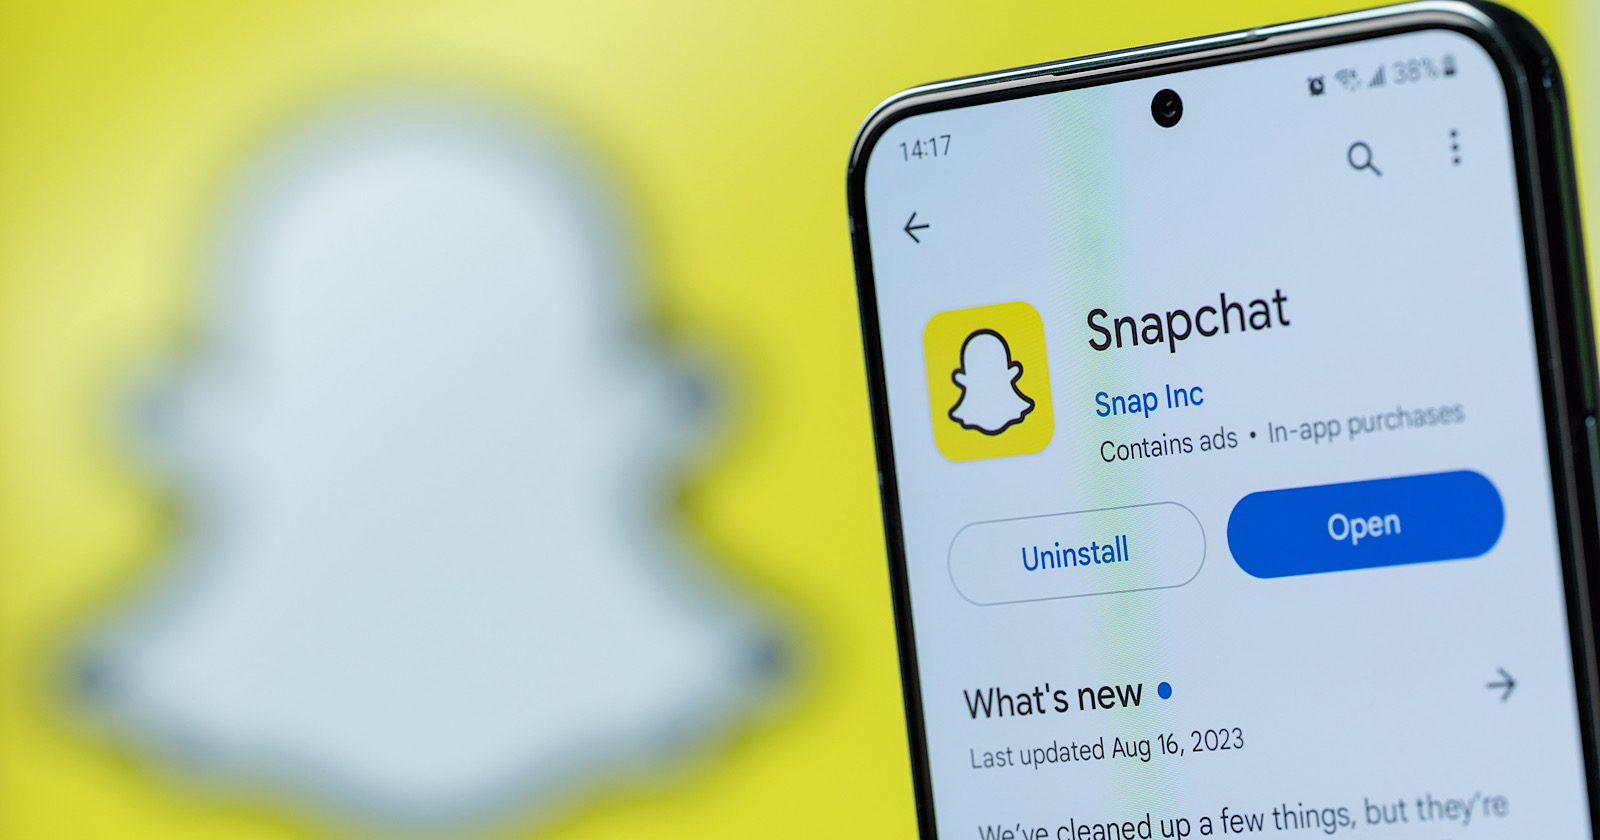 Snapchat Content Goes Beyond The App With New Embed Capability via @sejournal, @MattGSouthern